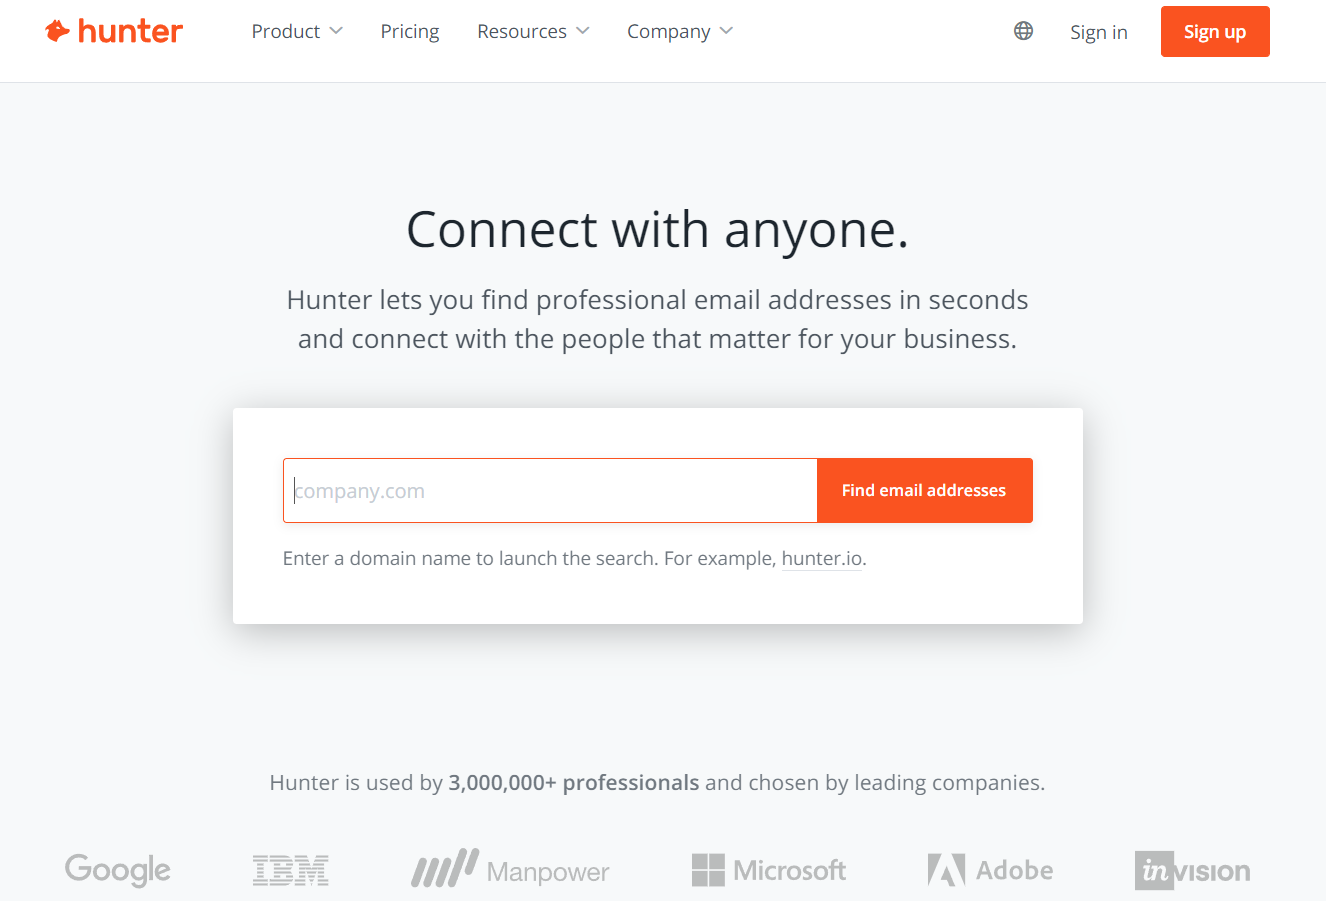 Hunter is an excellent email marketing solution.